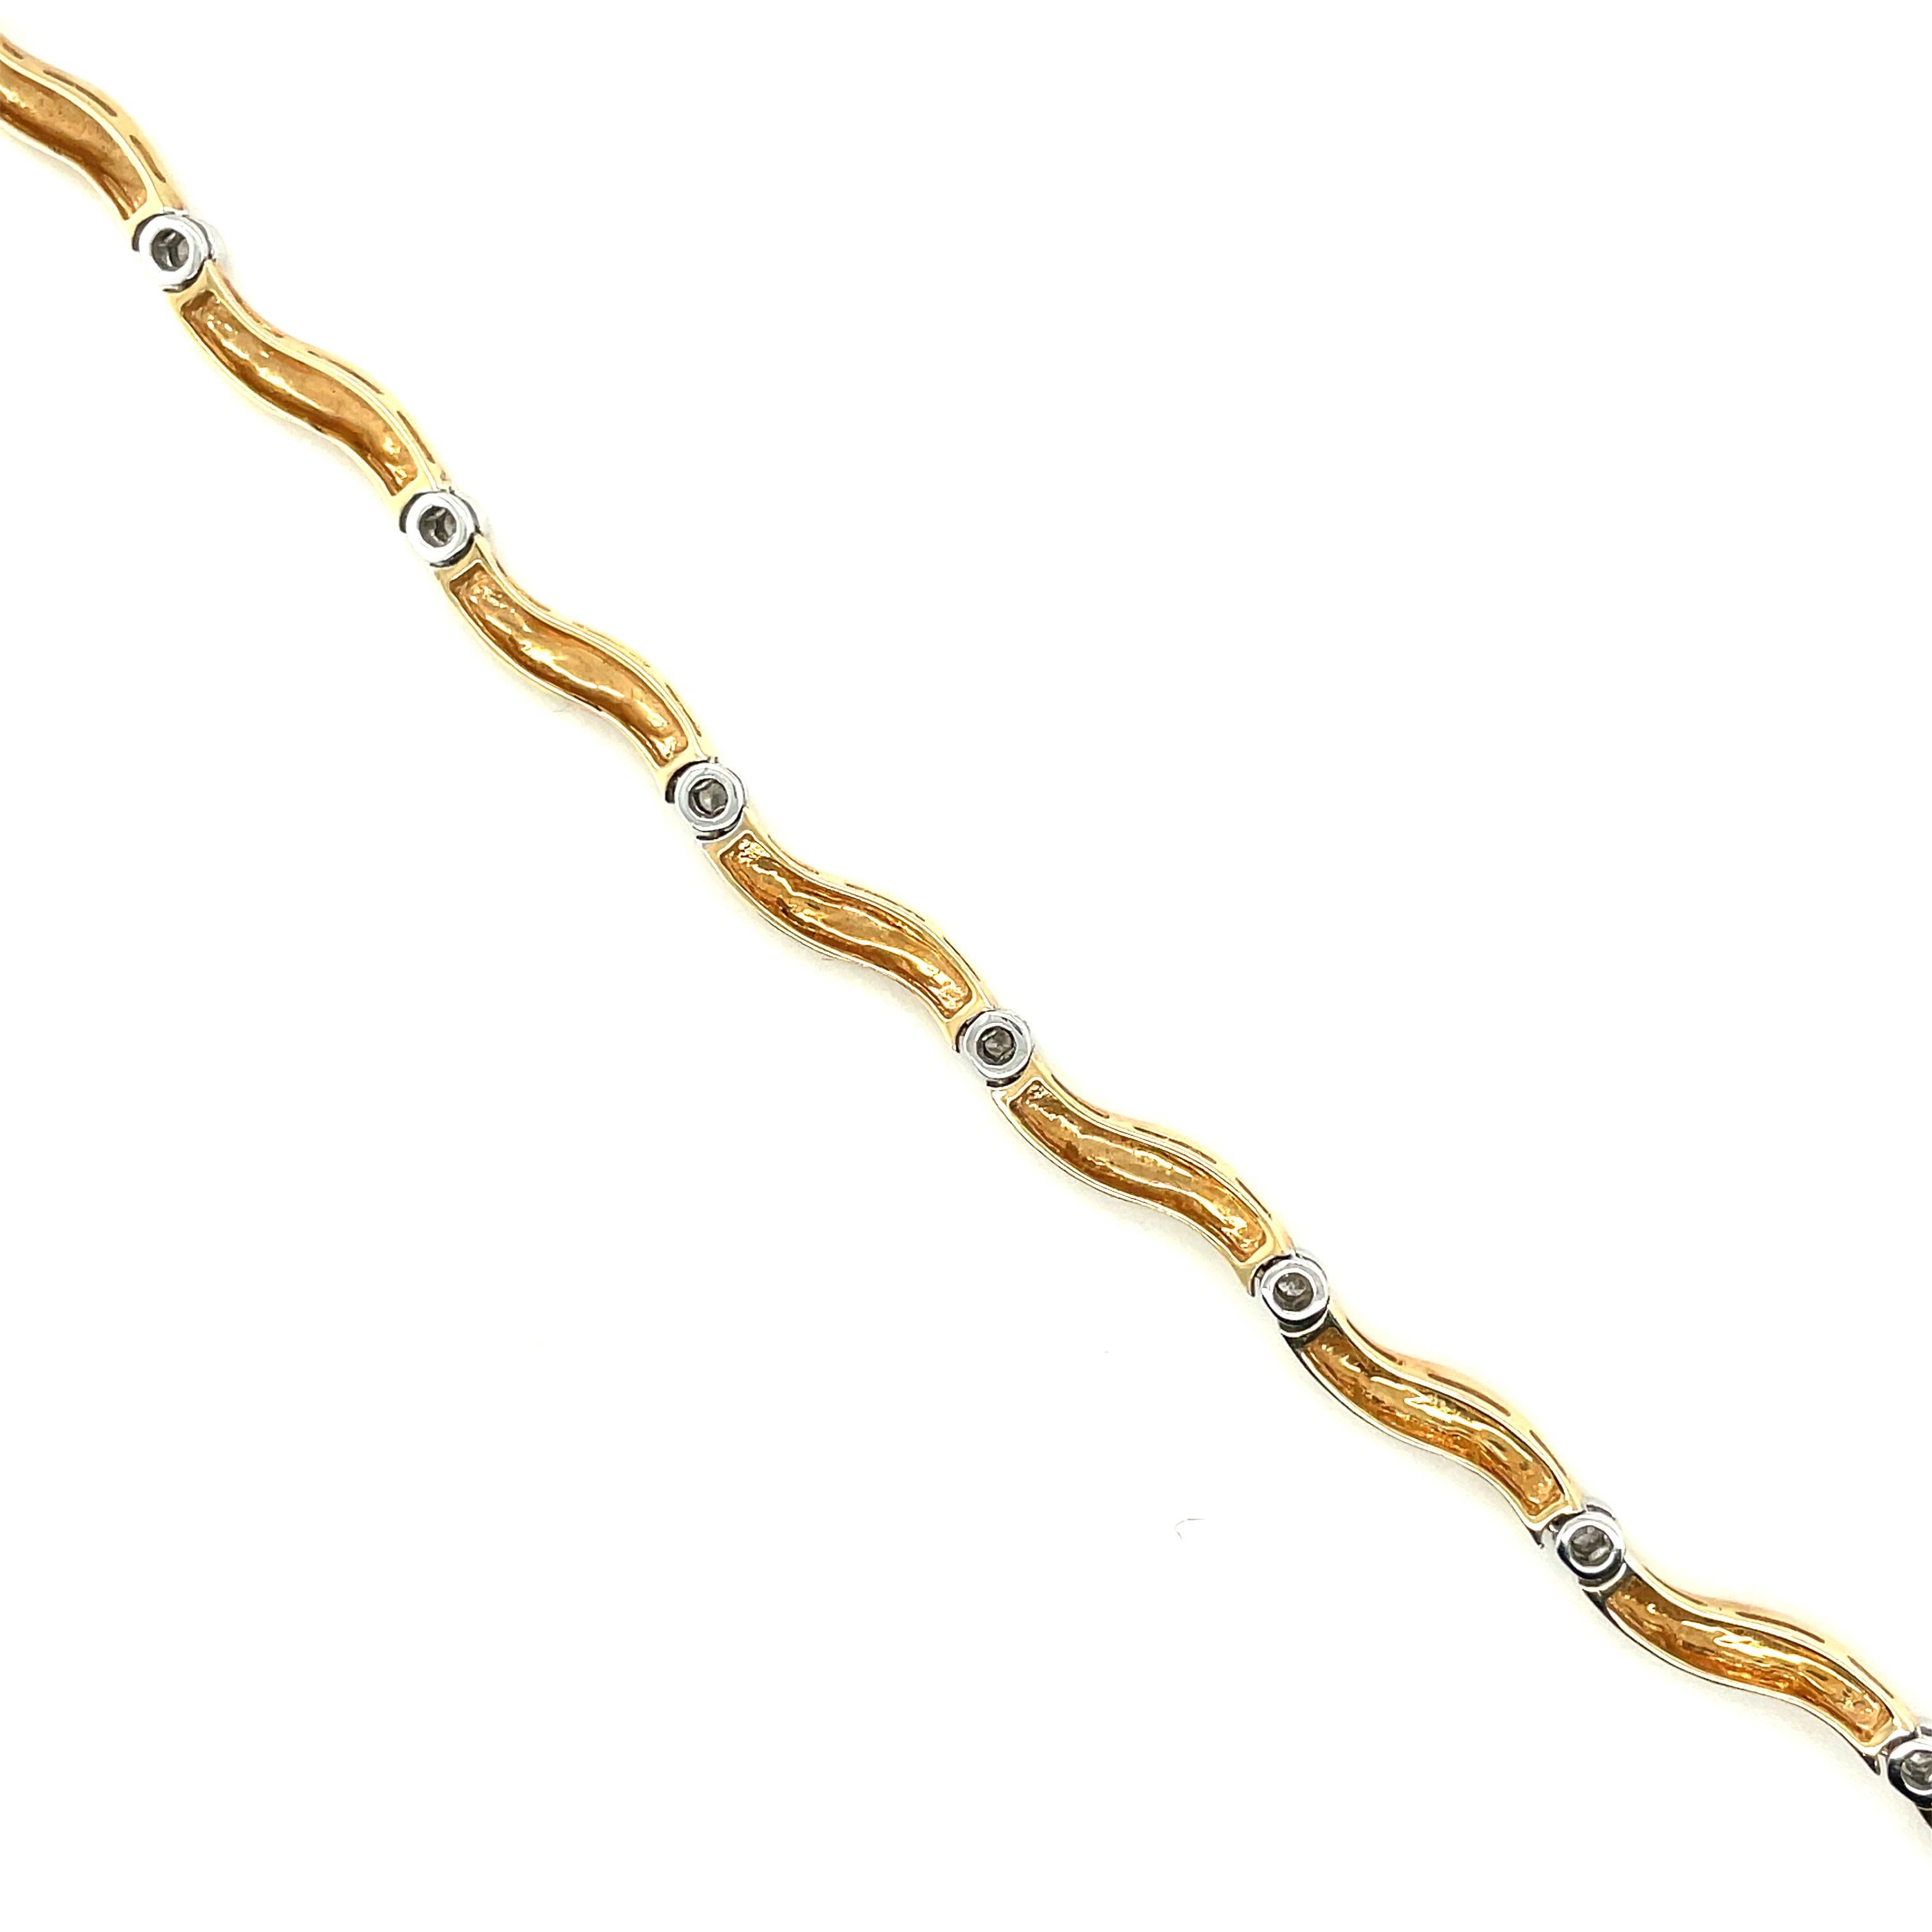 14K Yellow and White Gold Diamond Twist Necklace

Grams 22.2